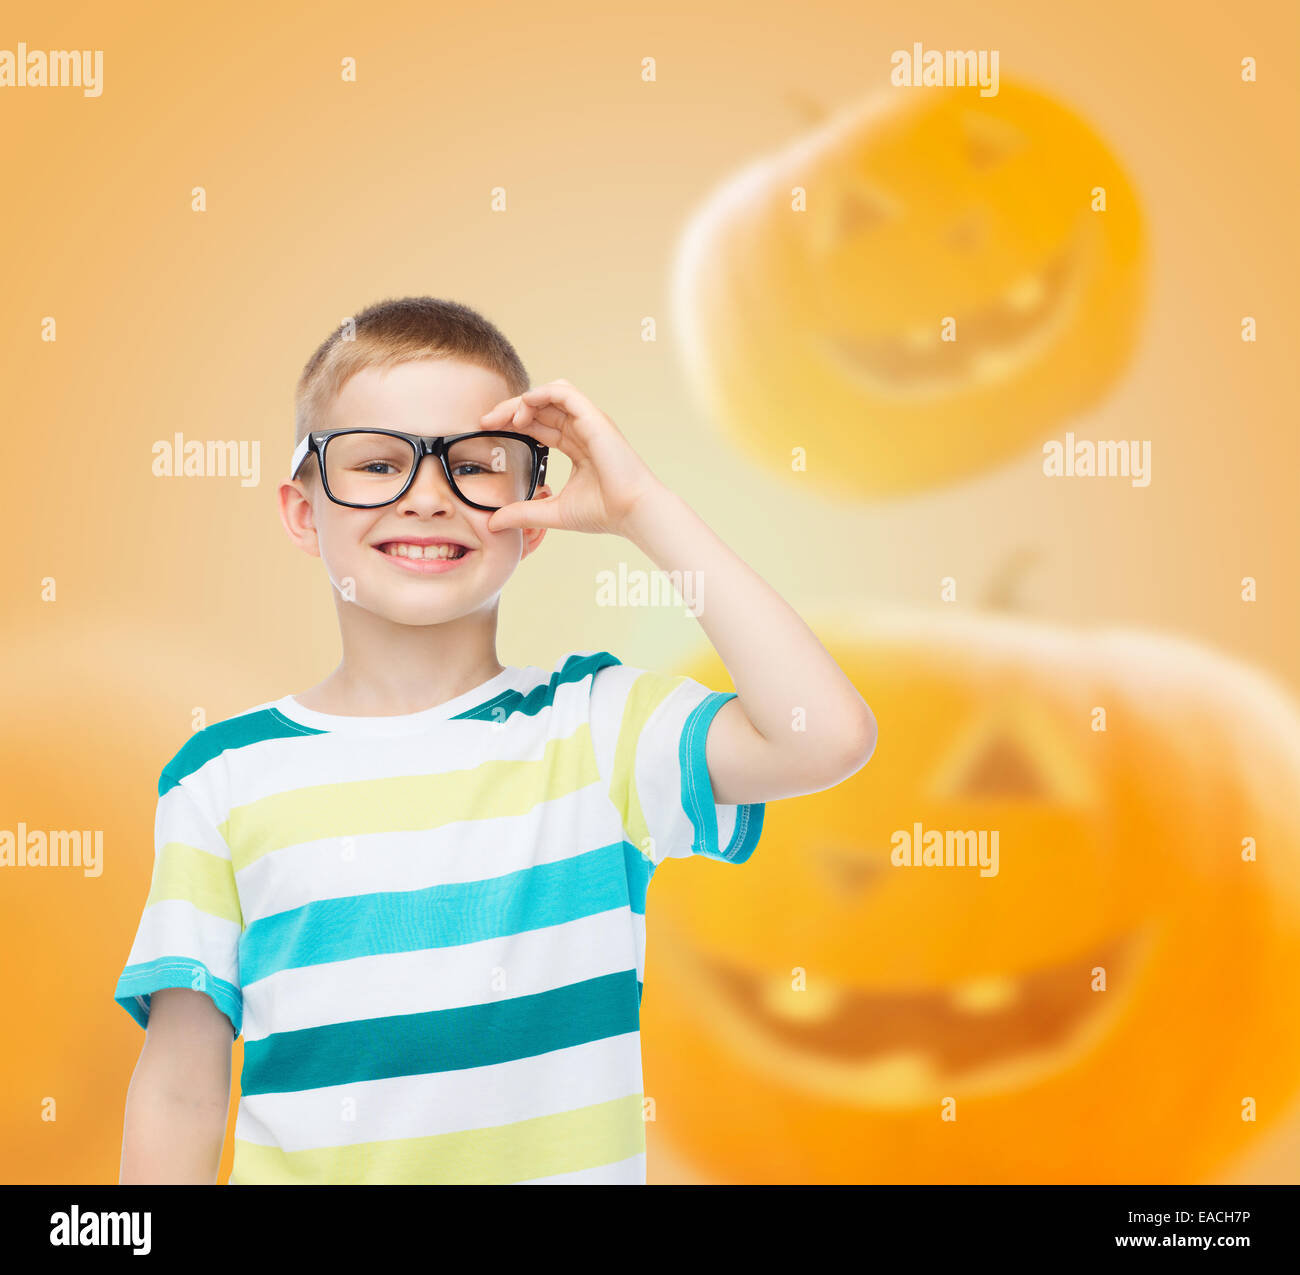 smiling boy in glasses over pumpkins background Stock Photo